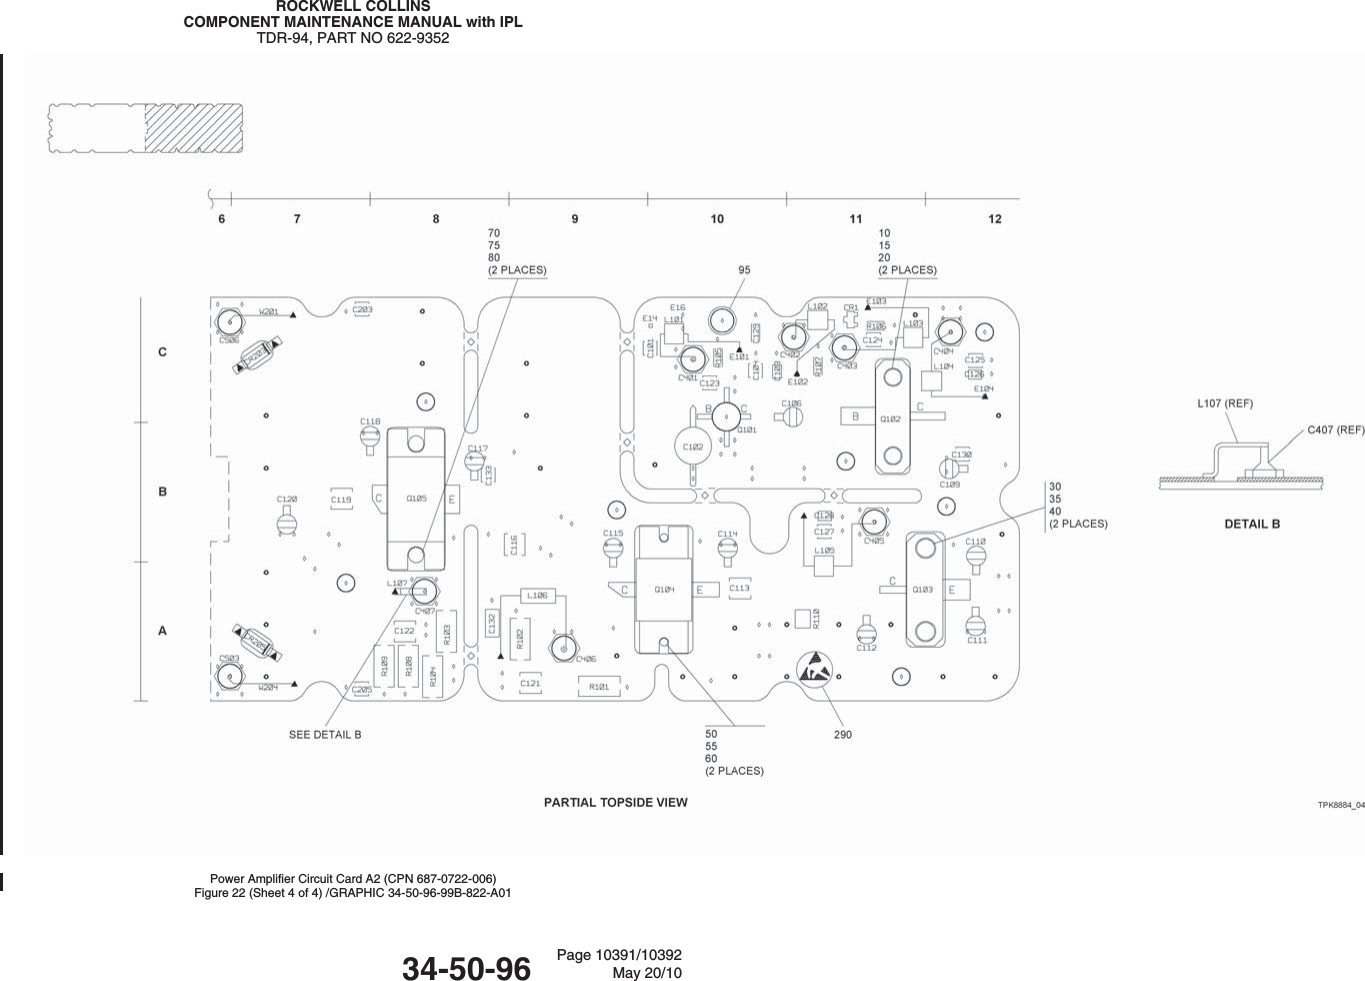 ROCKWELL COLLINSCOMPONENT MAINTENANCE MANUAL with IPLTDR-94, PART NO 622-9352Power Amplifier Circuit Card A2 (CPN 687-0722-006)Figure 22 (Sheet 4 of 4) /GRAPHIC 34-50-96-99B-822-A0134-50-96 Page 10391/10392May 20/10